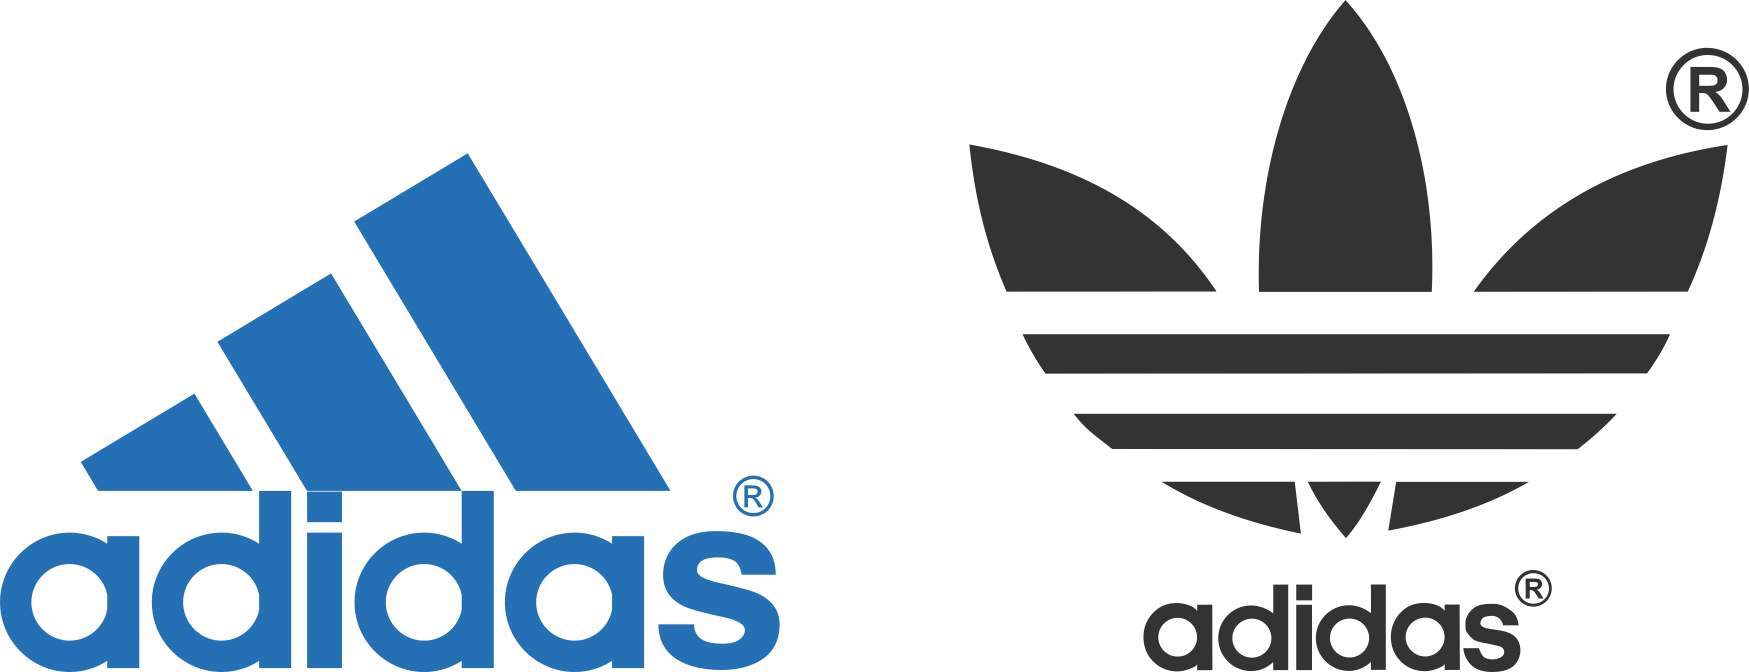 2500+ Free logo adidas png Designs - High Resolution and Full Screen